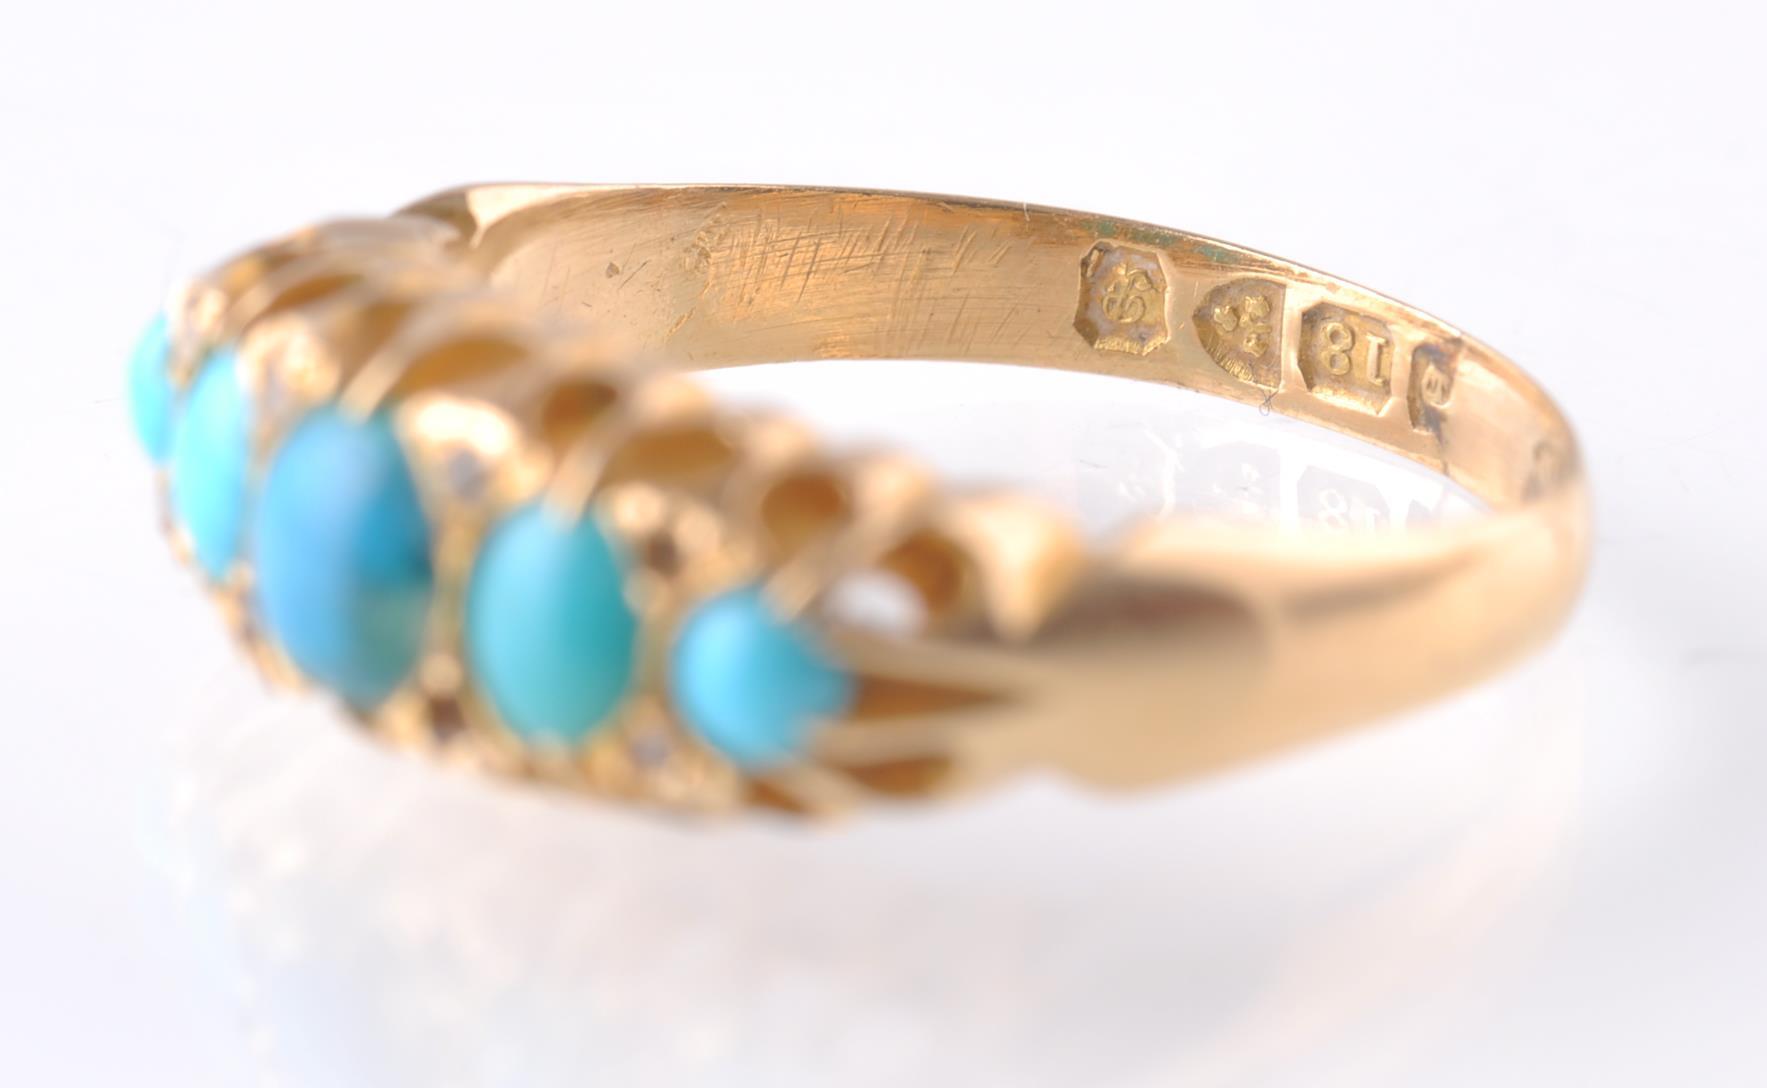 An 18CT GOLD & TURQUOISE GYPSY RING - 1915 - Image 4 of 4